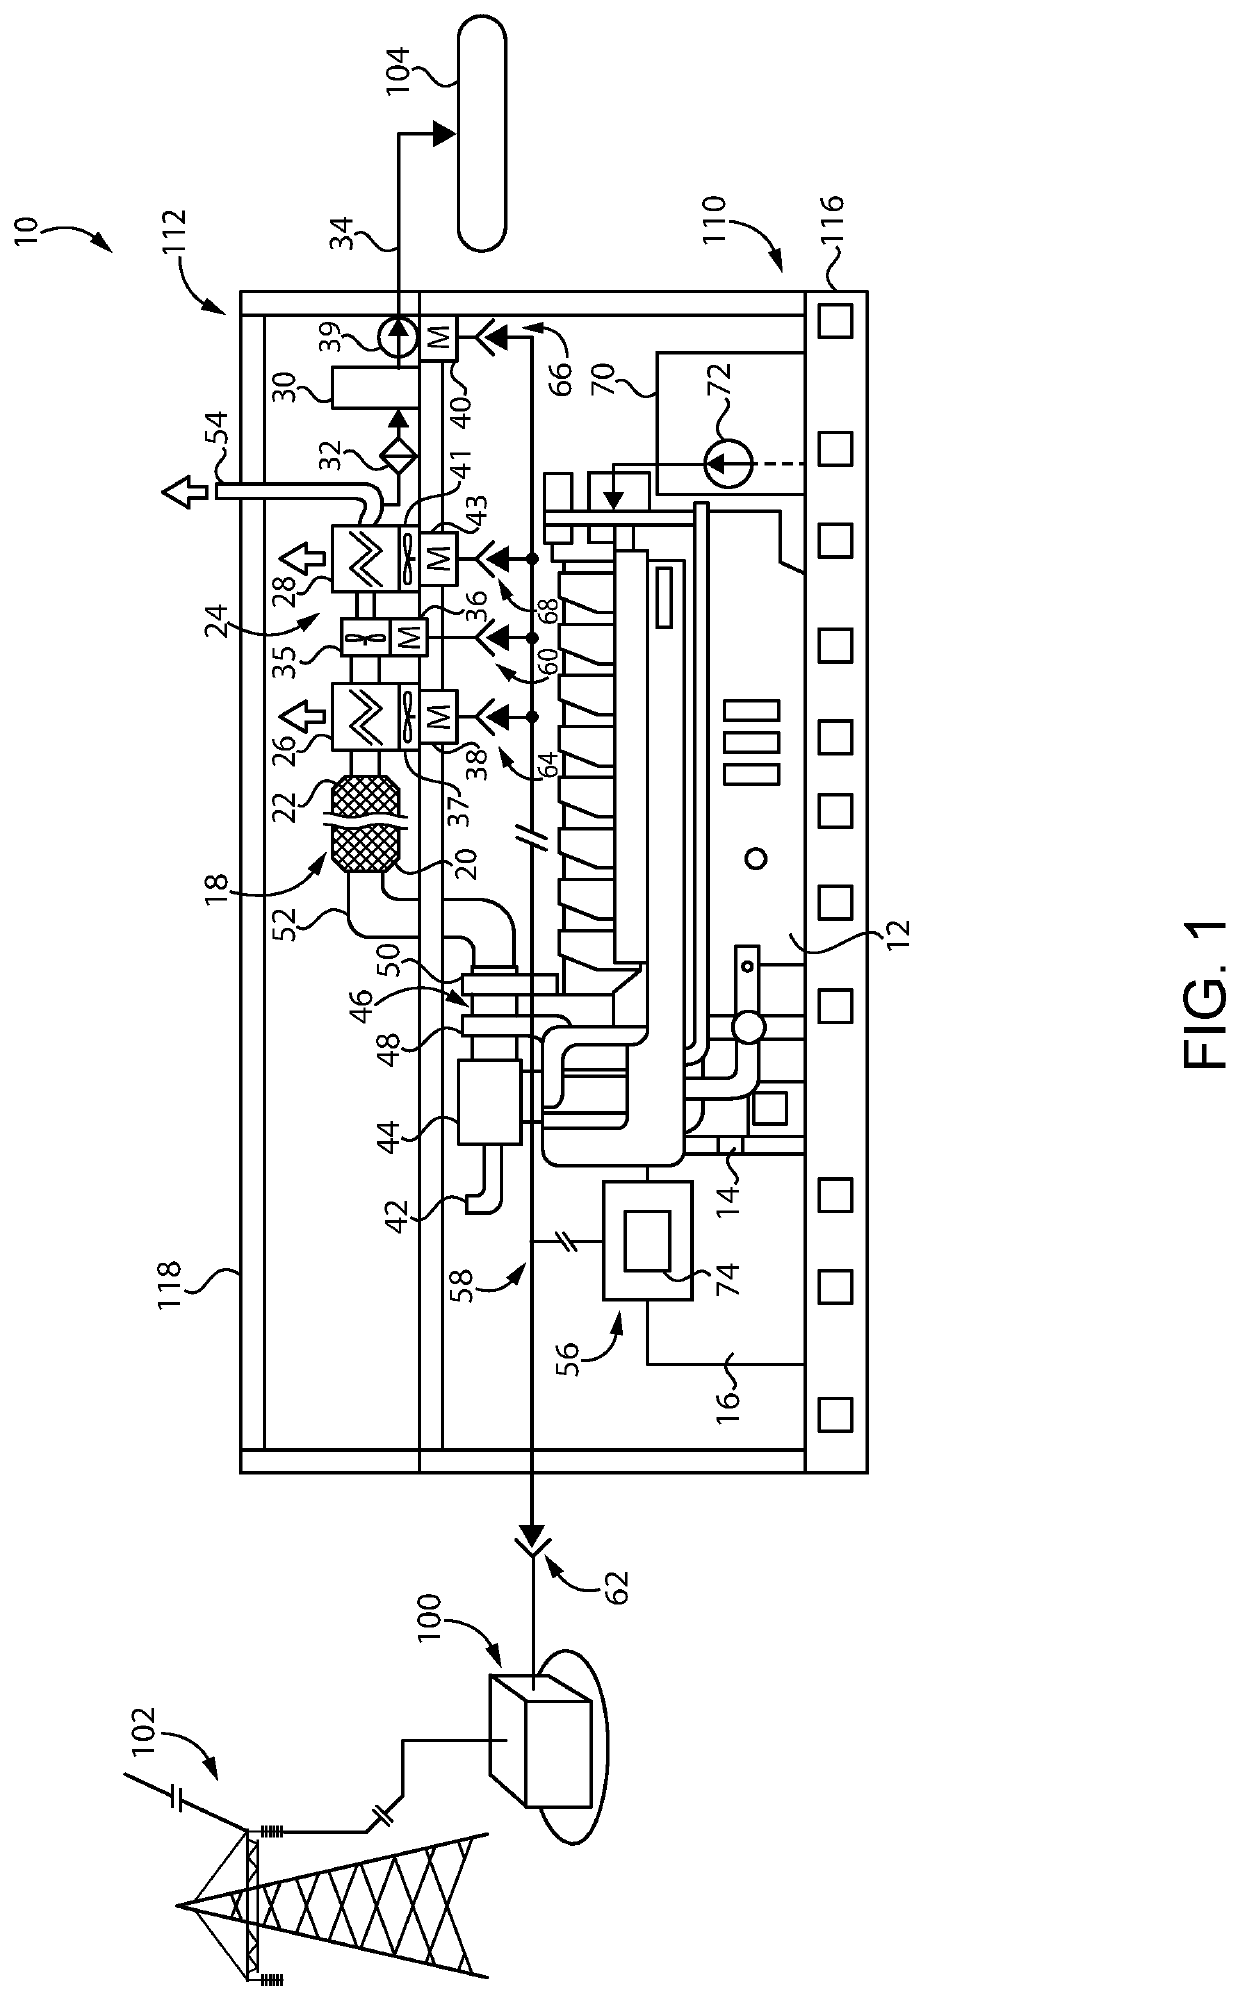 Machine system for co-production of electrical power and water and method of operating same